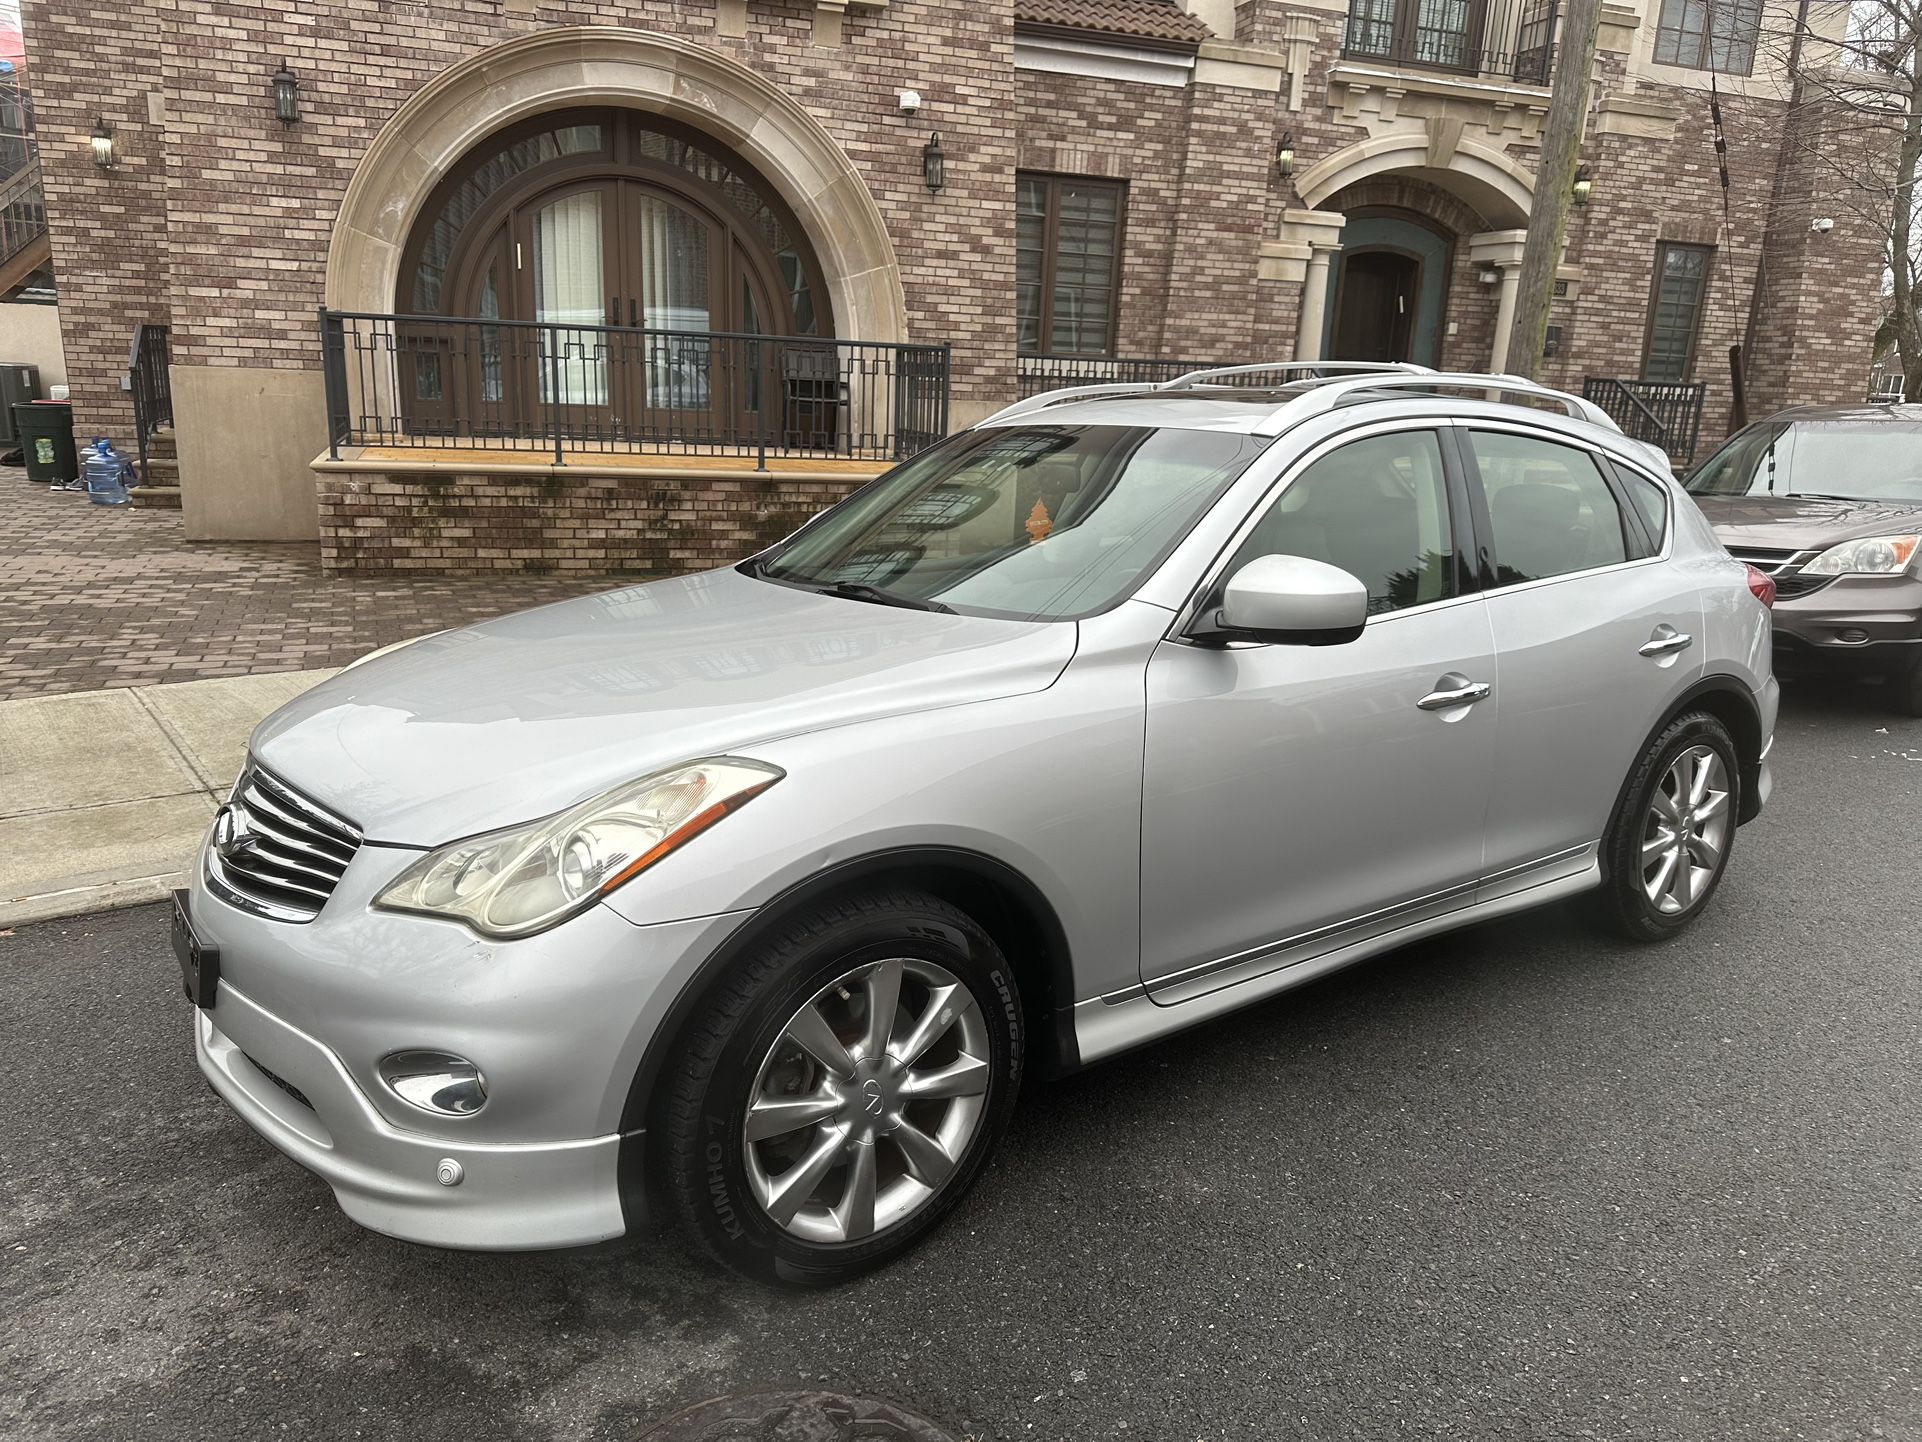 2011 Infiniti Ex35 Journey for Sale in Brooklyn, NY - OfferUp